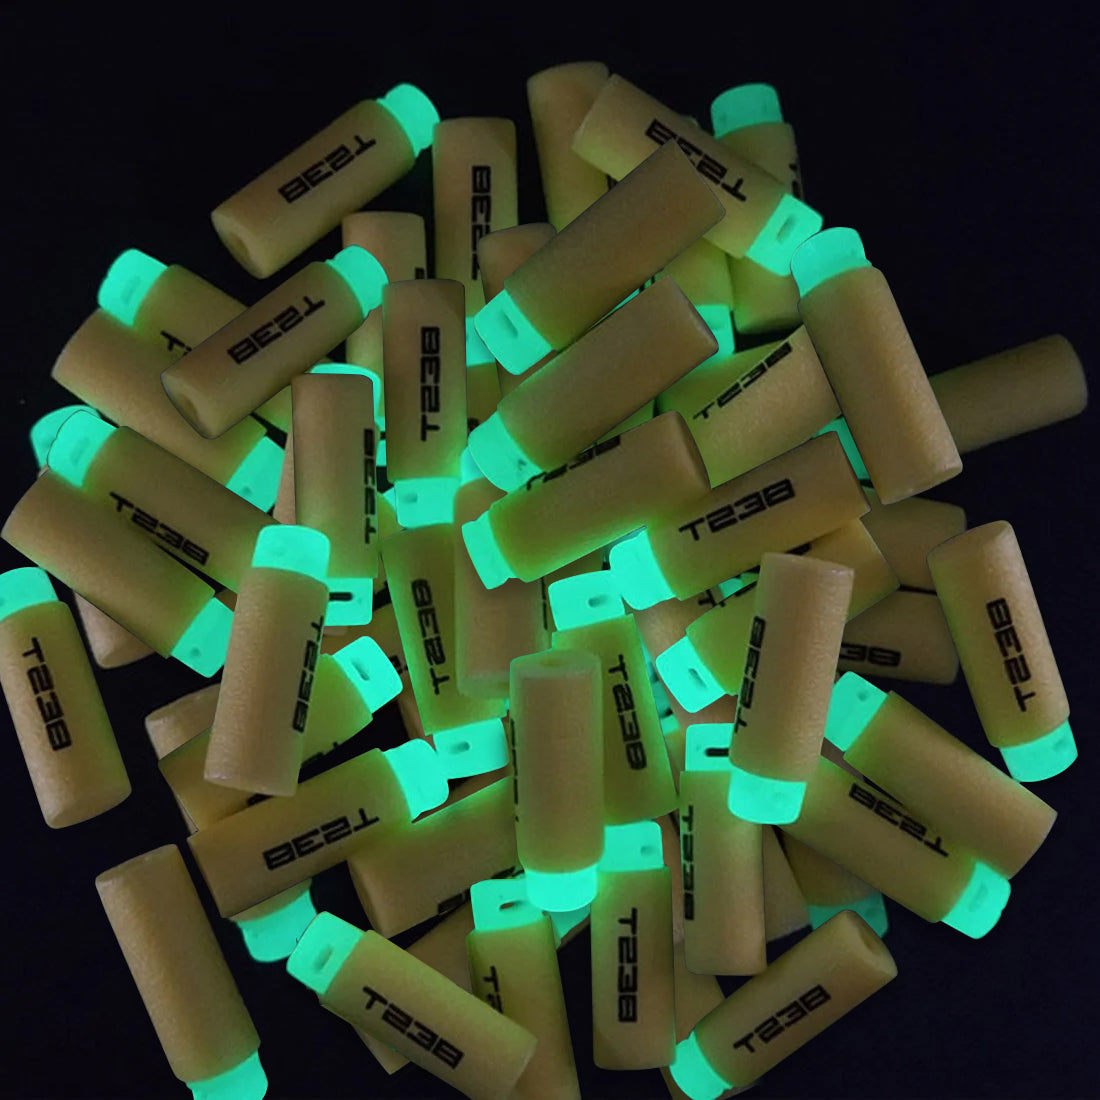 Tracer Foam Refill Darts Green Glowing Bullets for Nerf Series